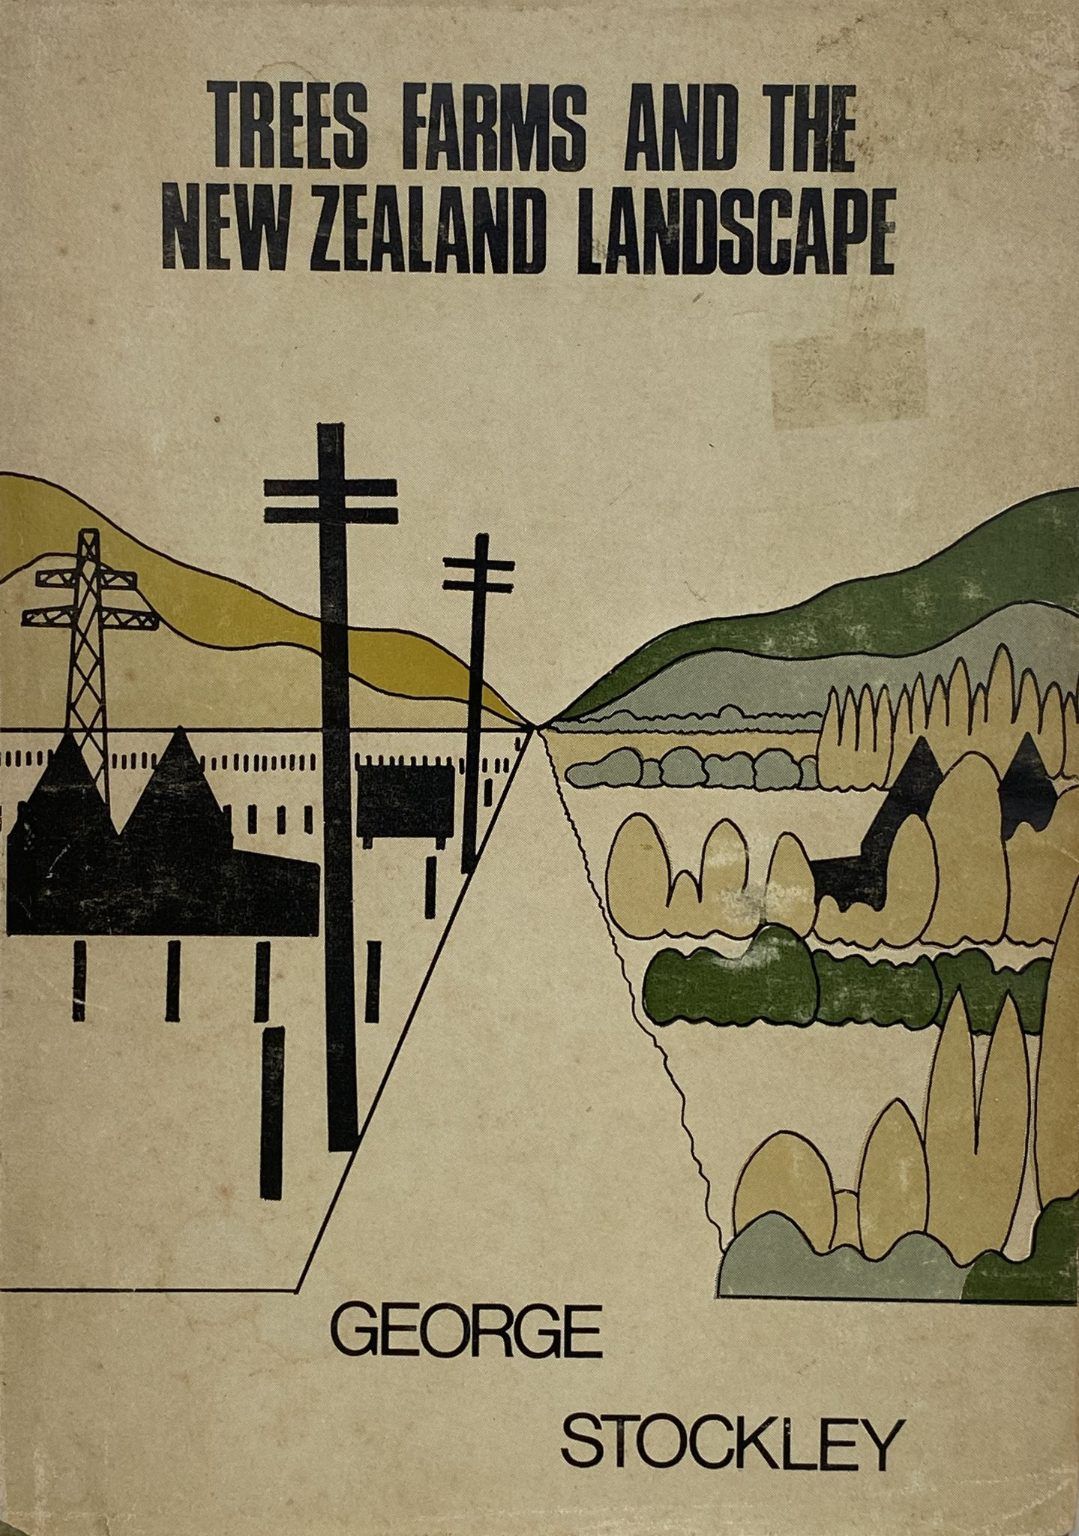 TREES, FARMS AND THE NEW ZEALAND LANDSCAPE